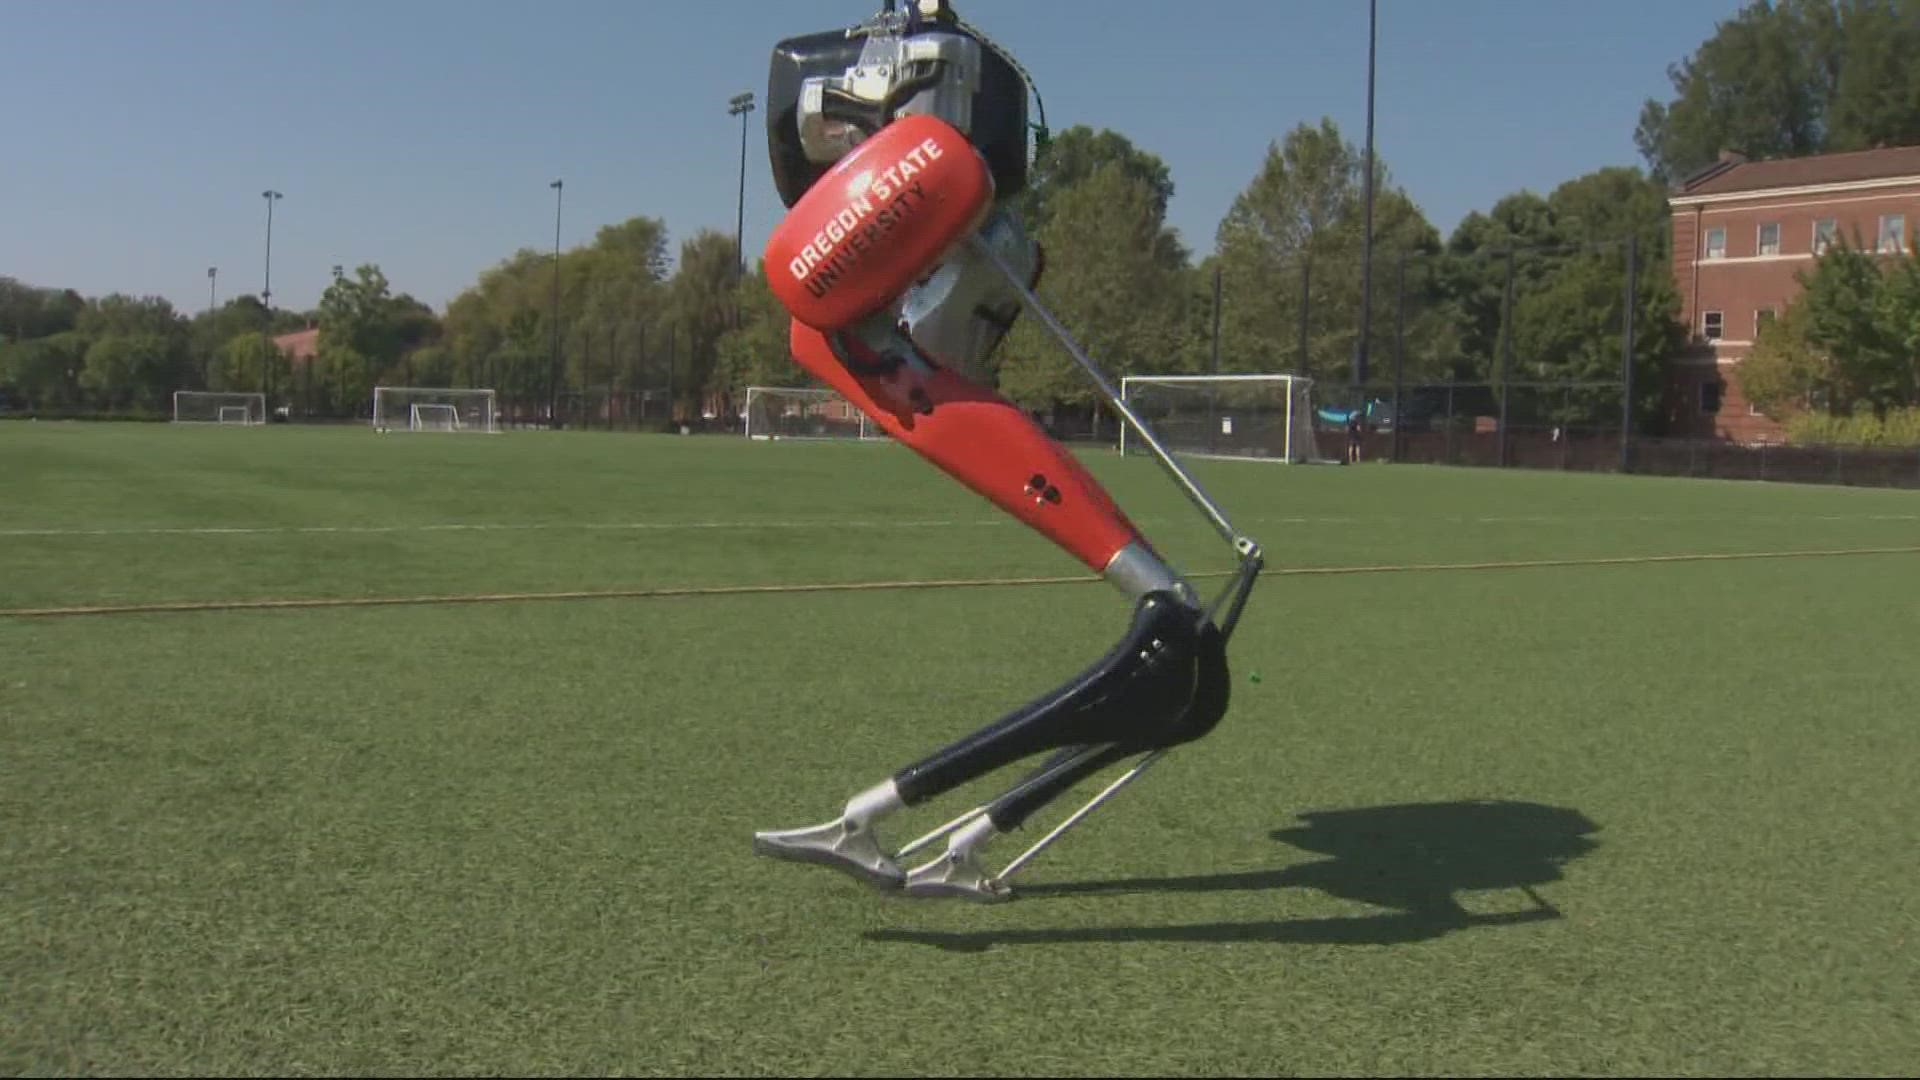 A bipedal robot named Cassie developed by students in the engineering department at Oregon State University is now in the Guinness Book of World Records.